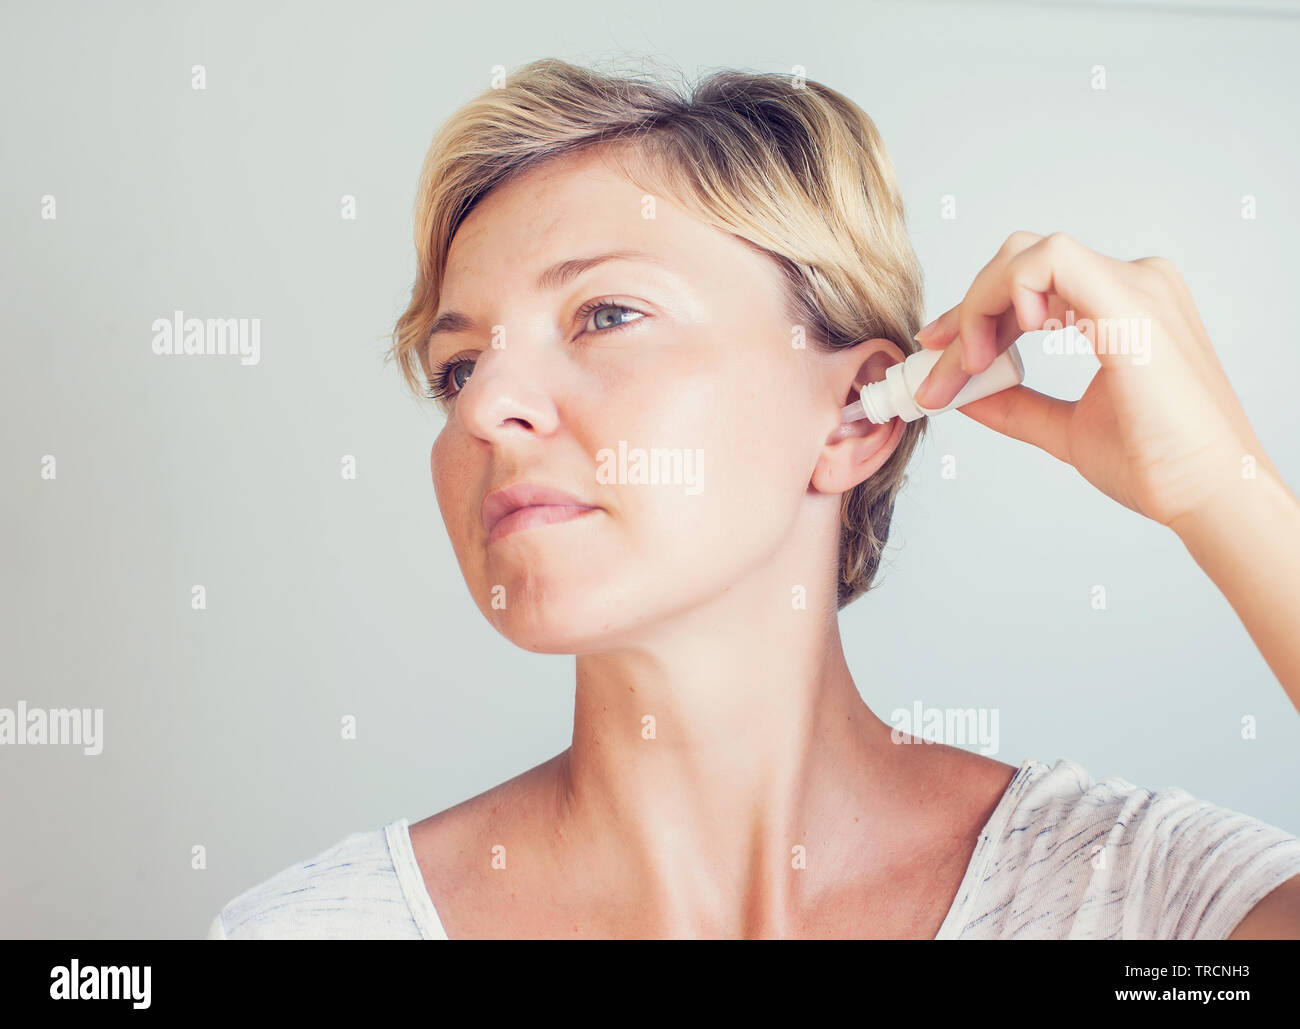 woman using ear drops on gray background Stock Photo